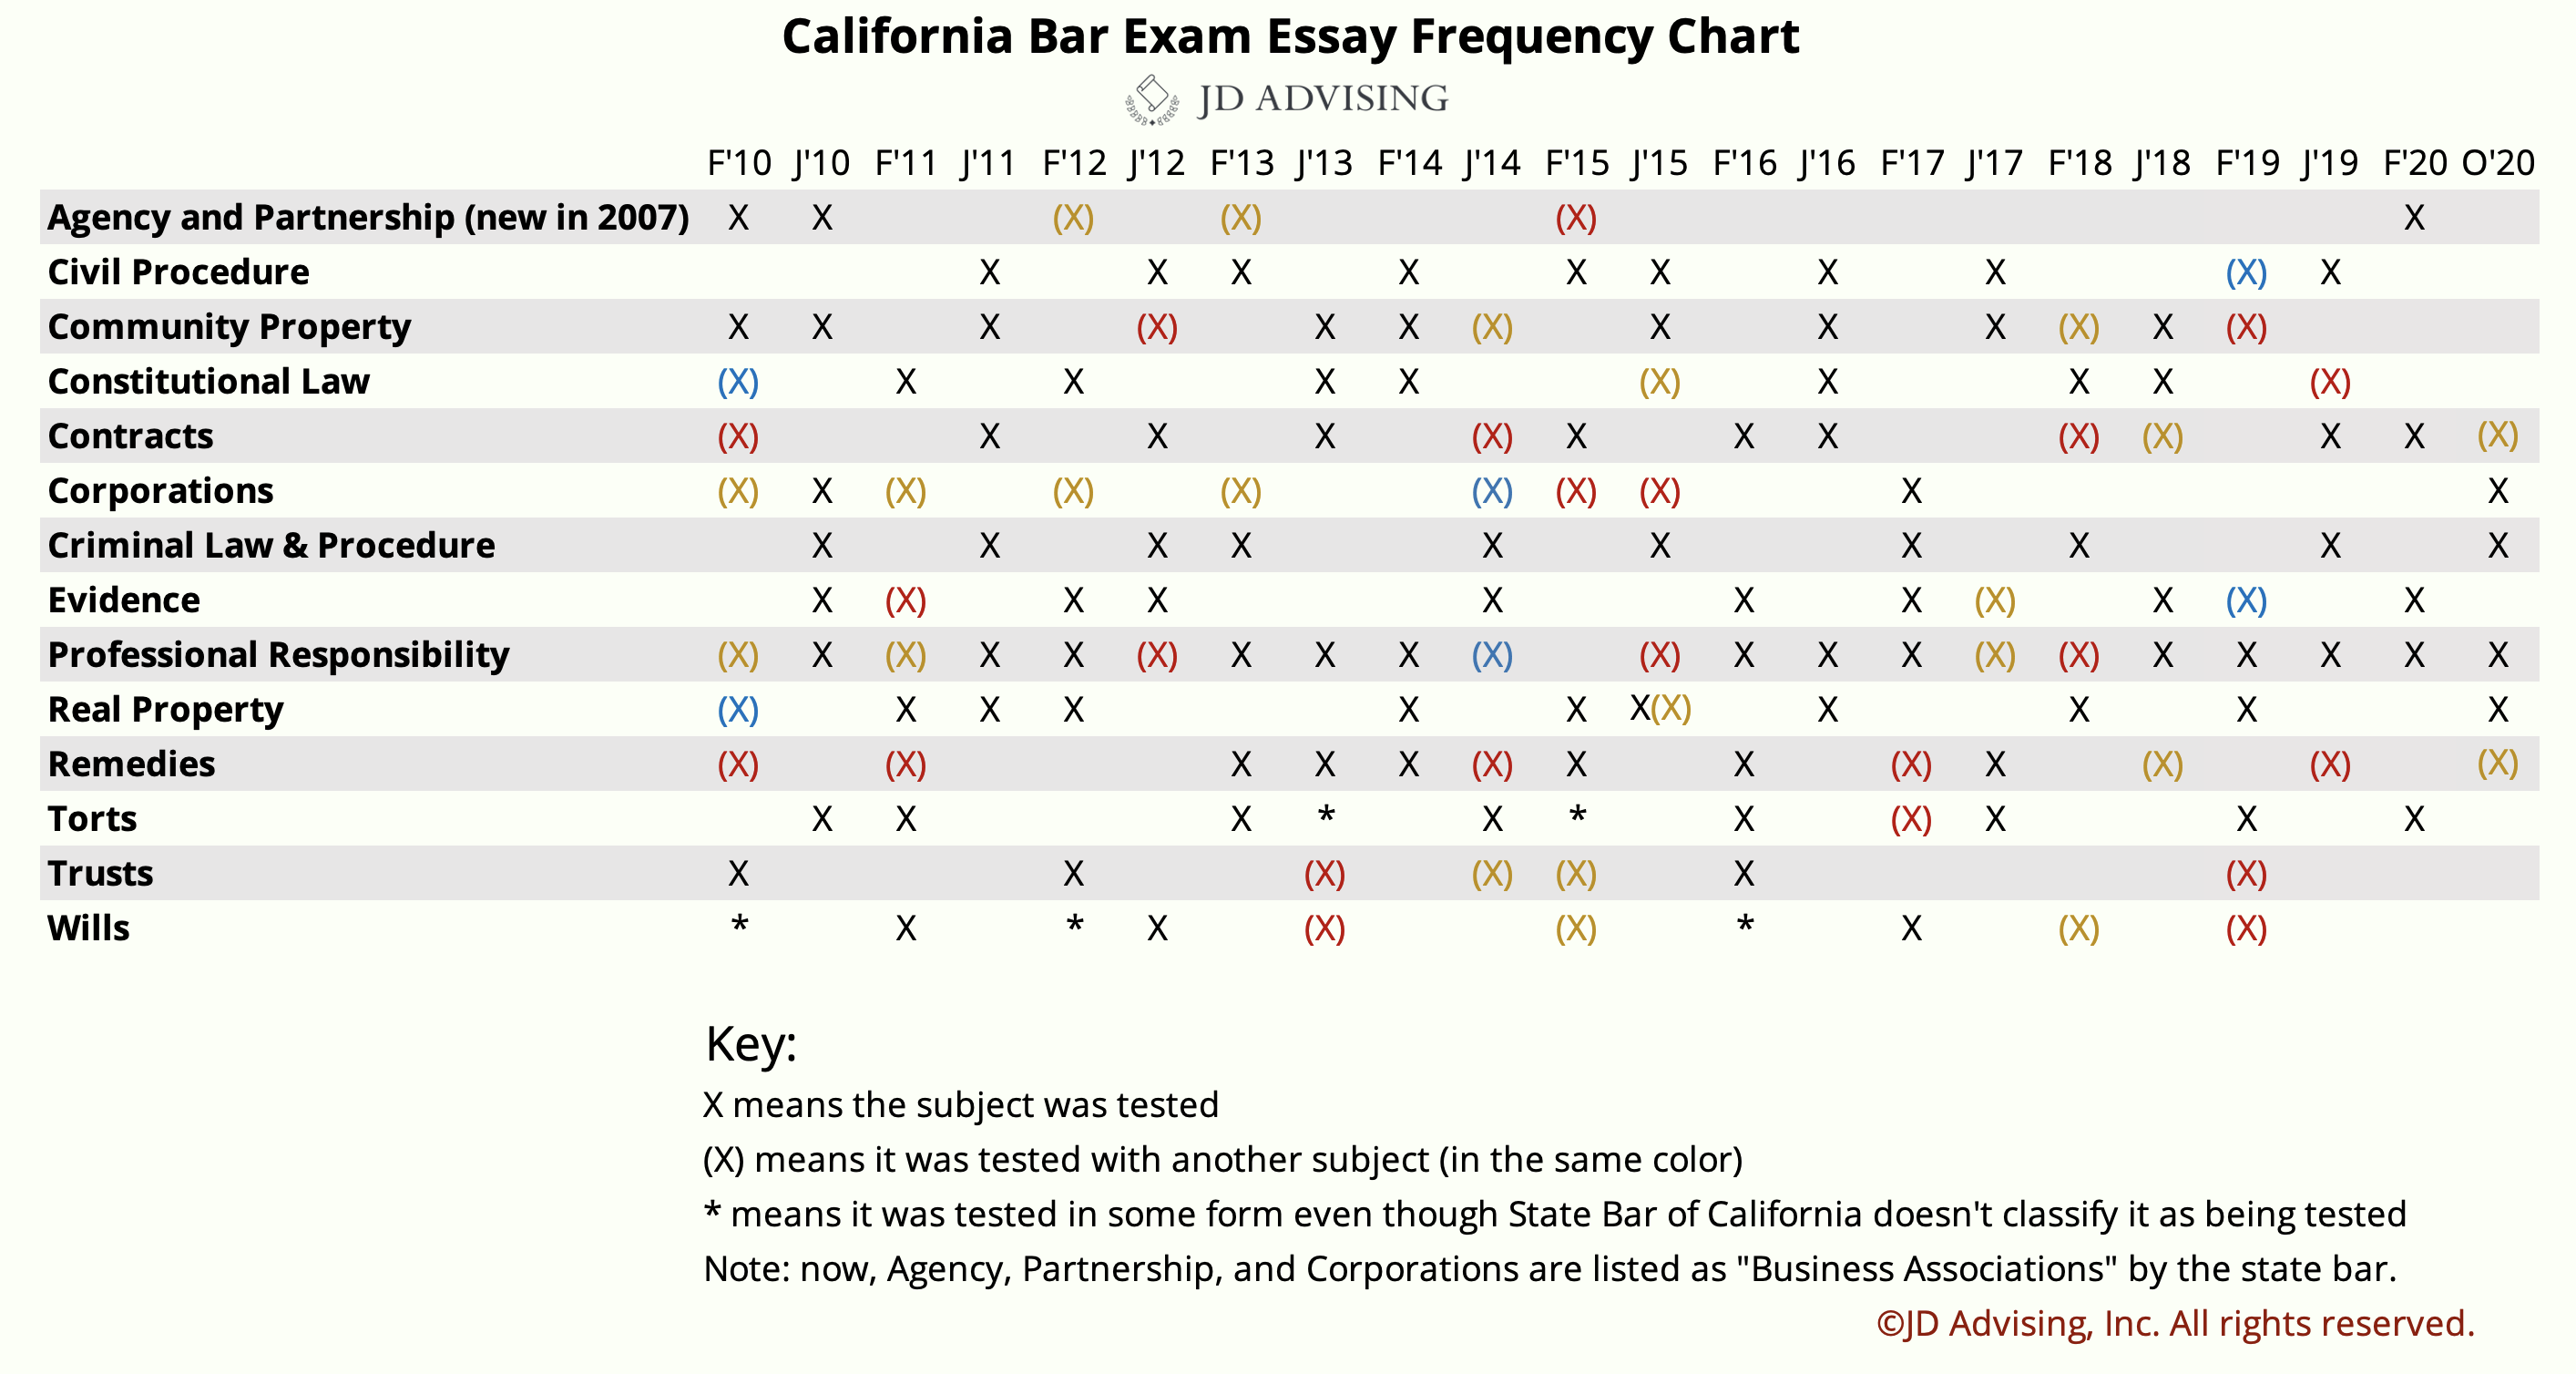 Barexam Reddit - A Comprehensive Guide To Using It For Bar Exam Preparation